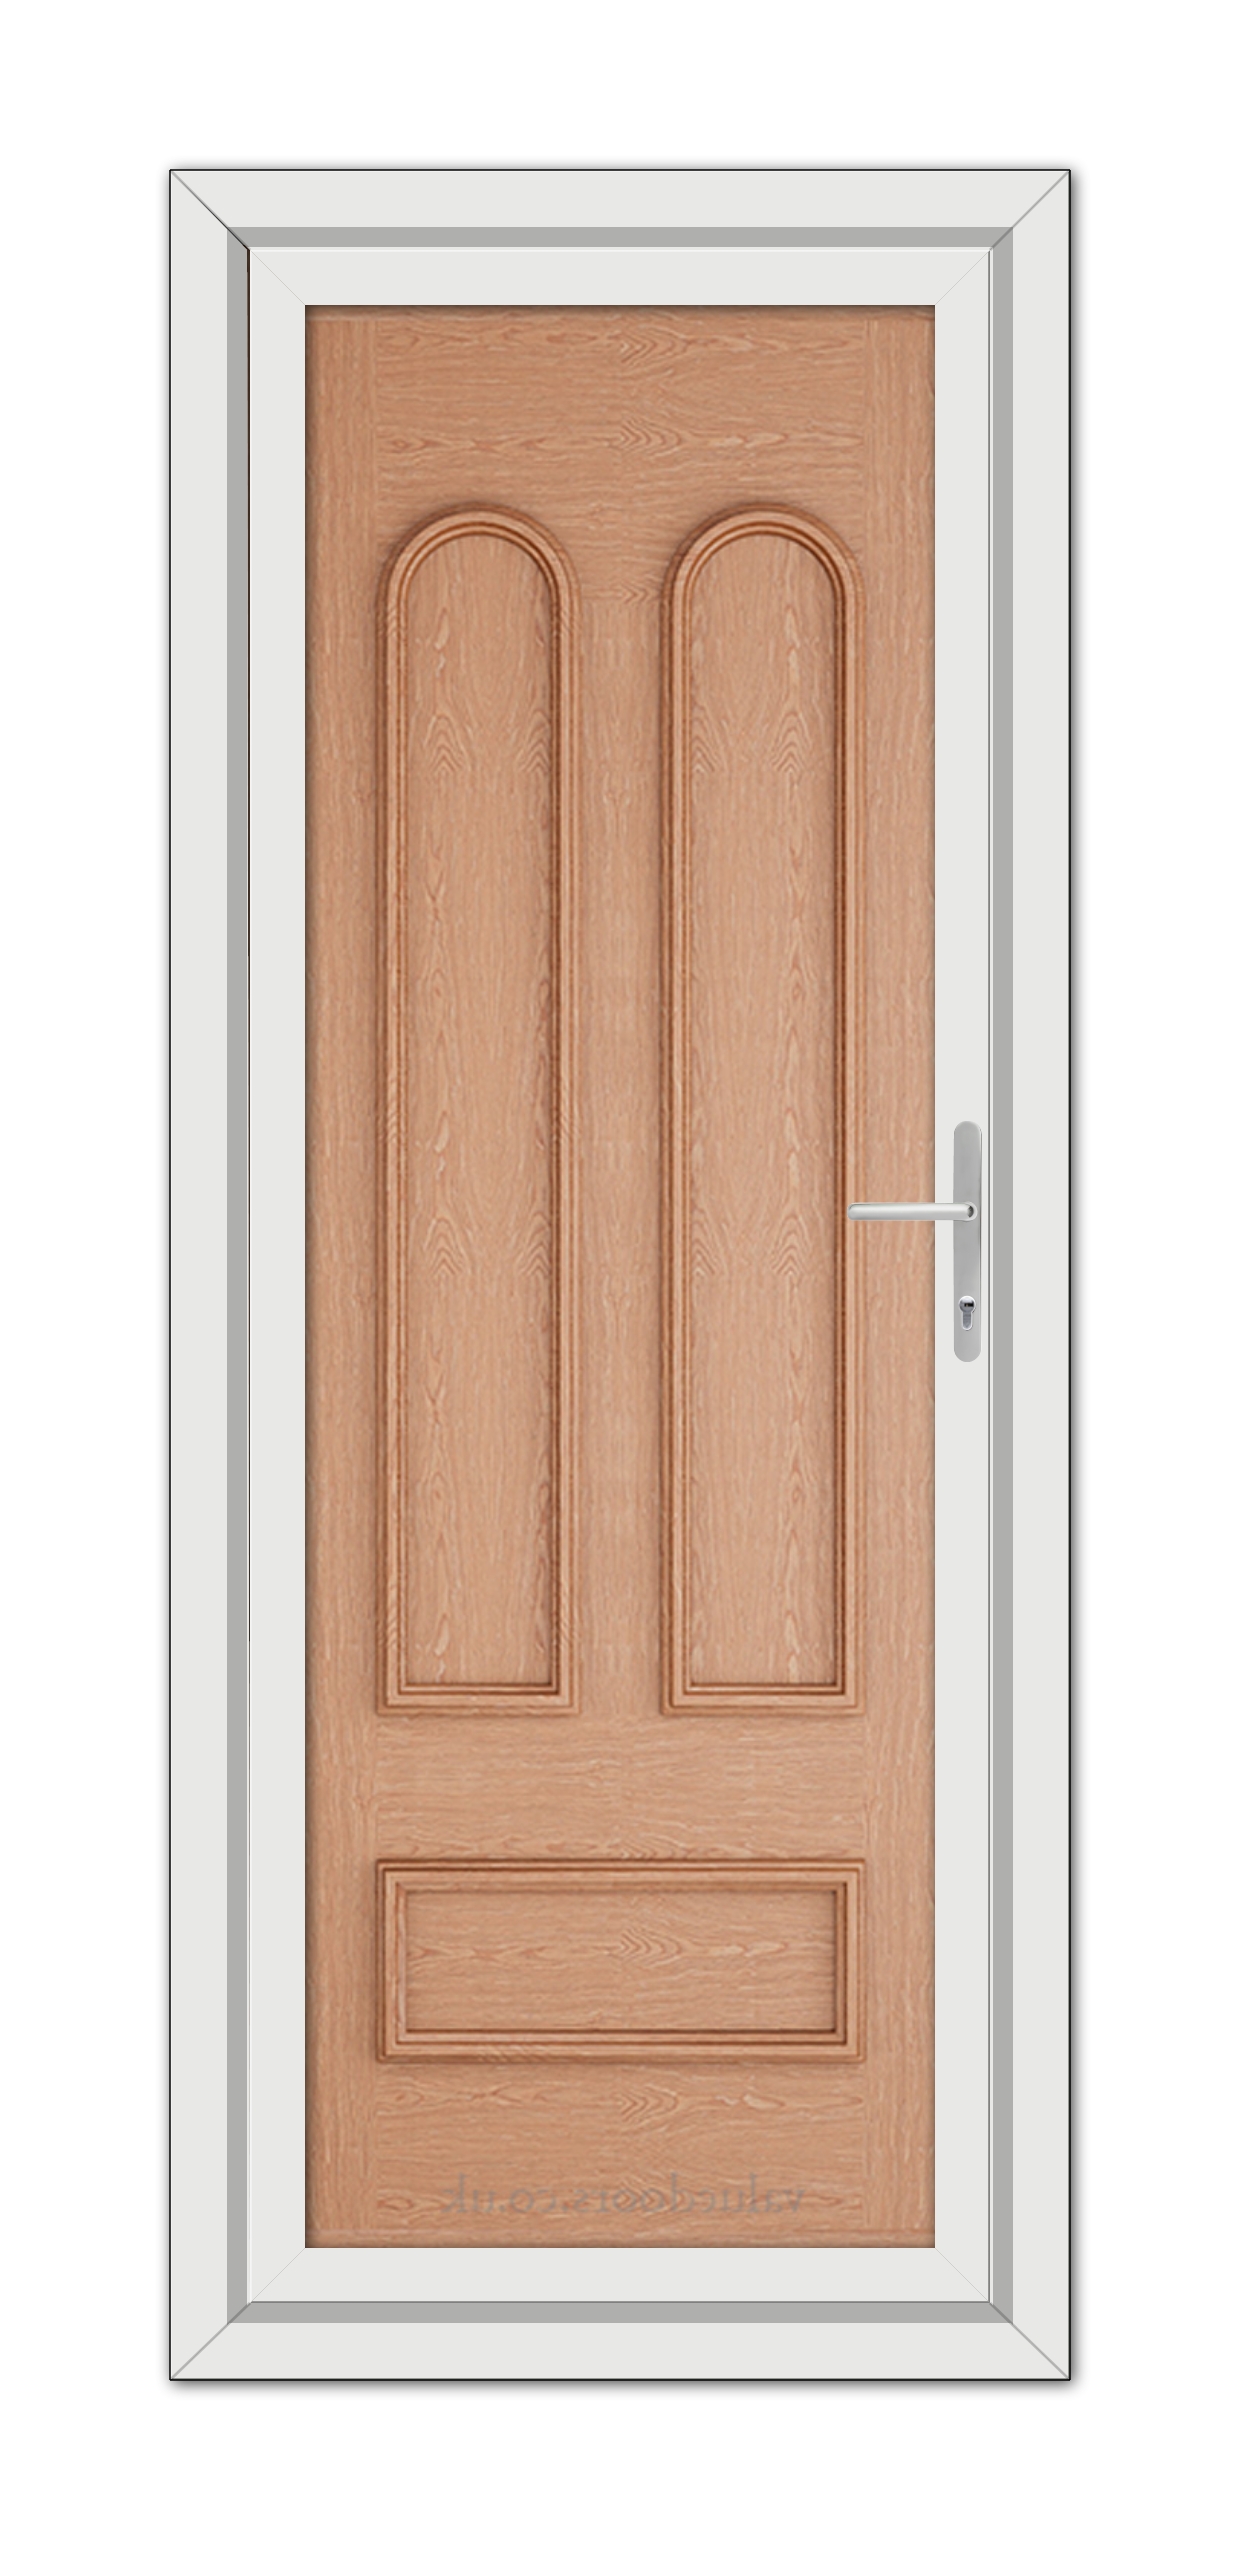 An Irish Oak Madrid Solid uPVC Door with a vertical handle, set within a white frame, viewed frontally.